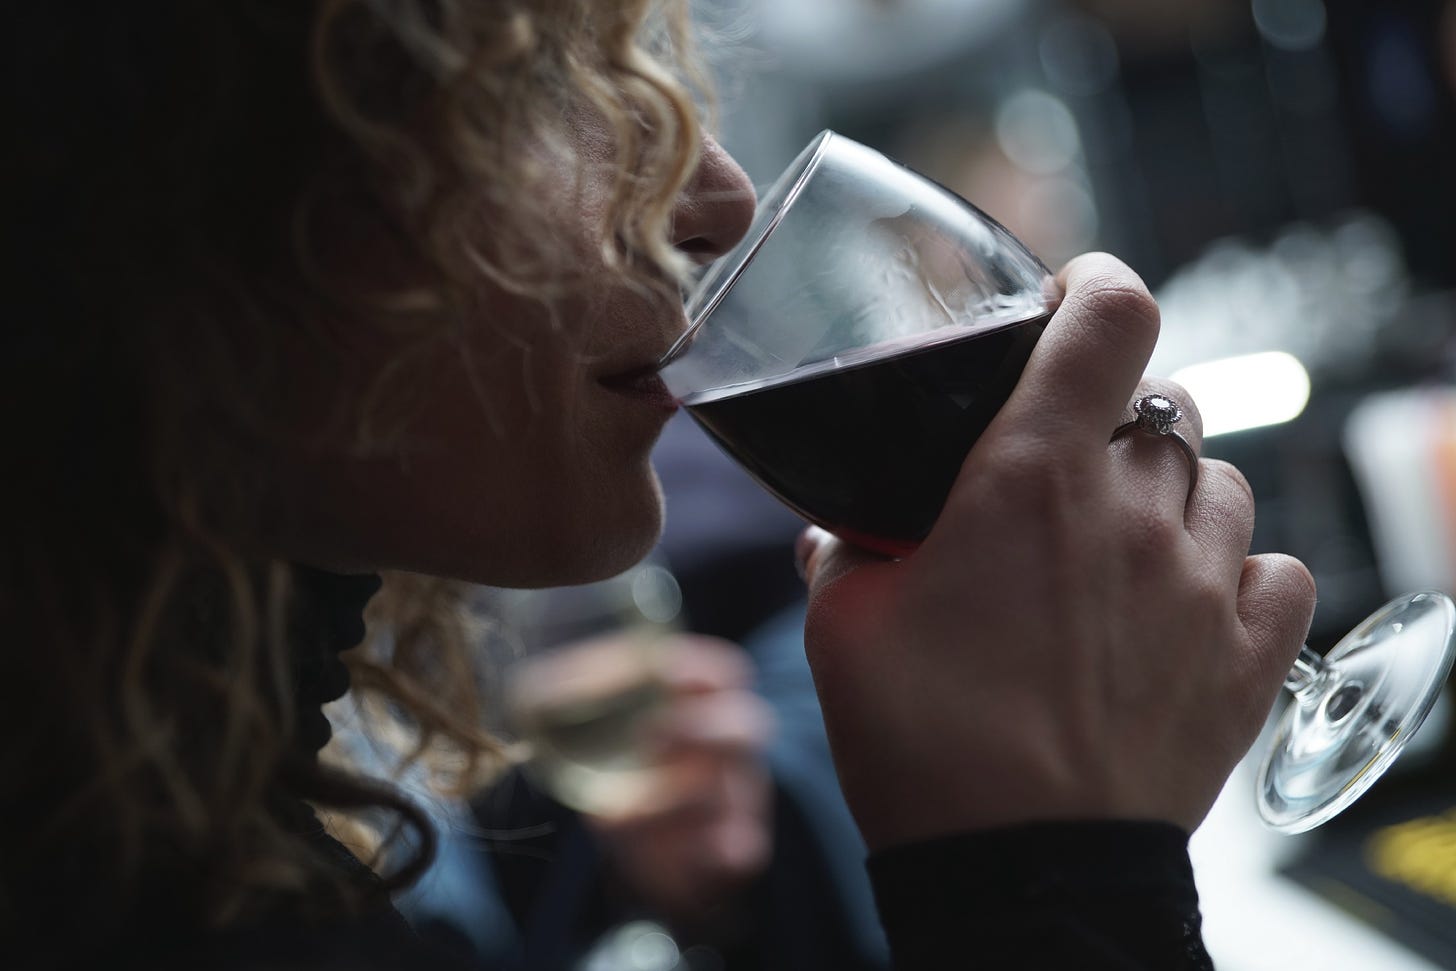 image of a woman drinking red wine for article titled “When Two Bottles of Wine Doesn’t Work”